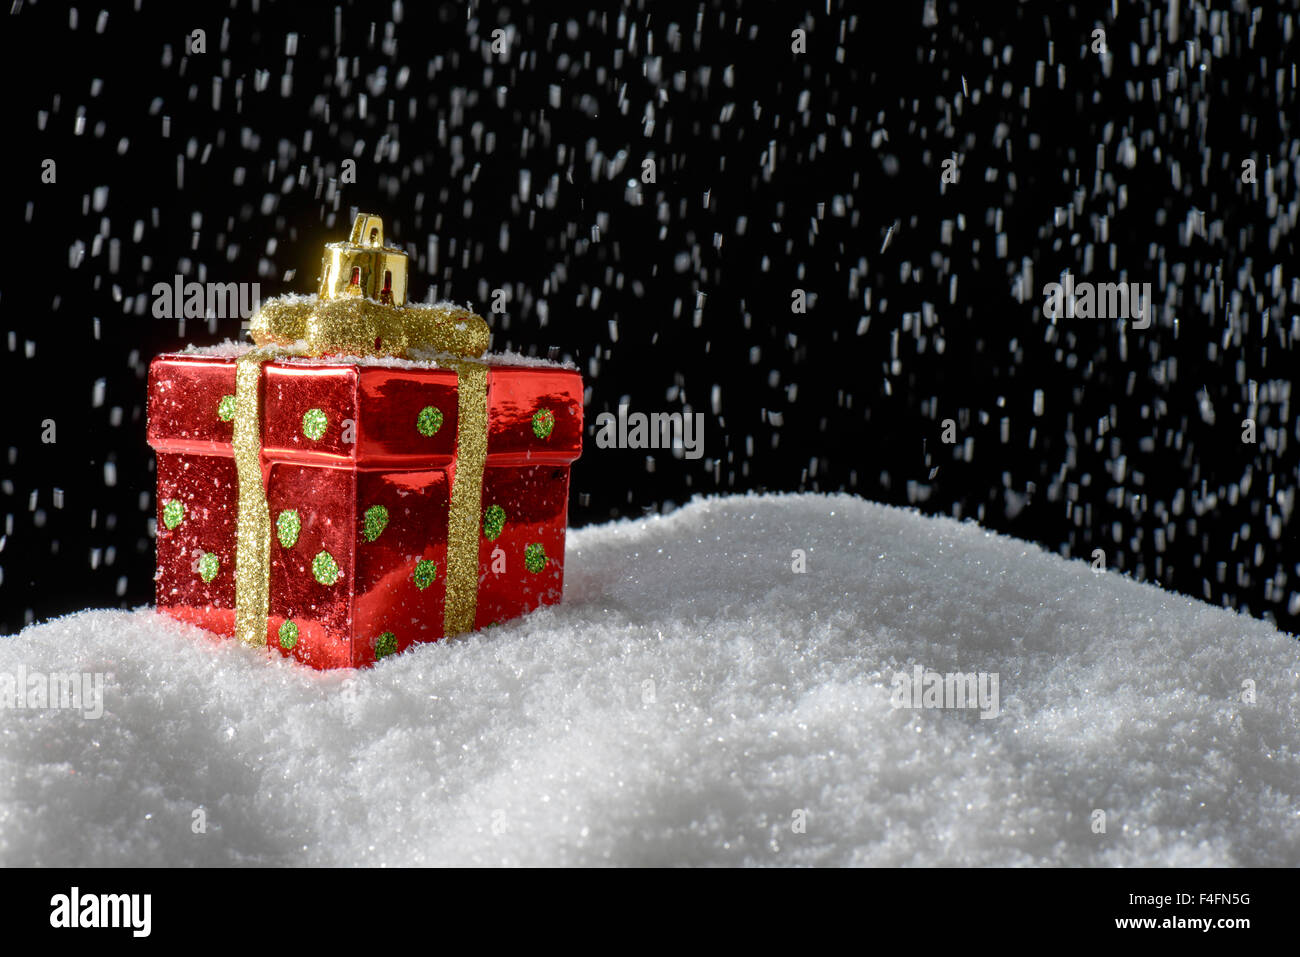 Christmas decoration Present on snow and its snowing Stock Photo